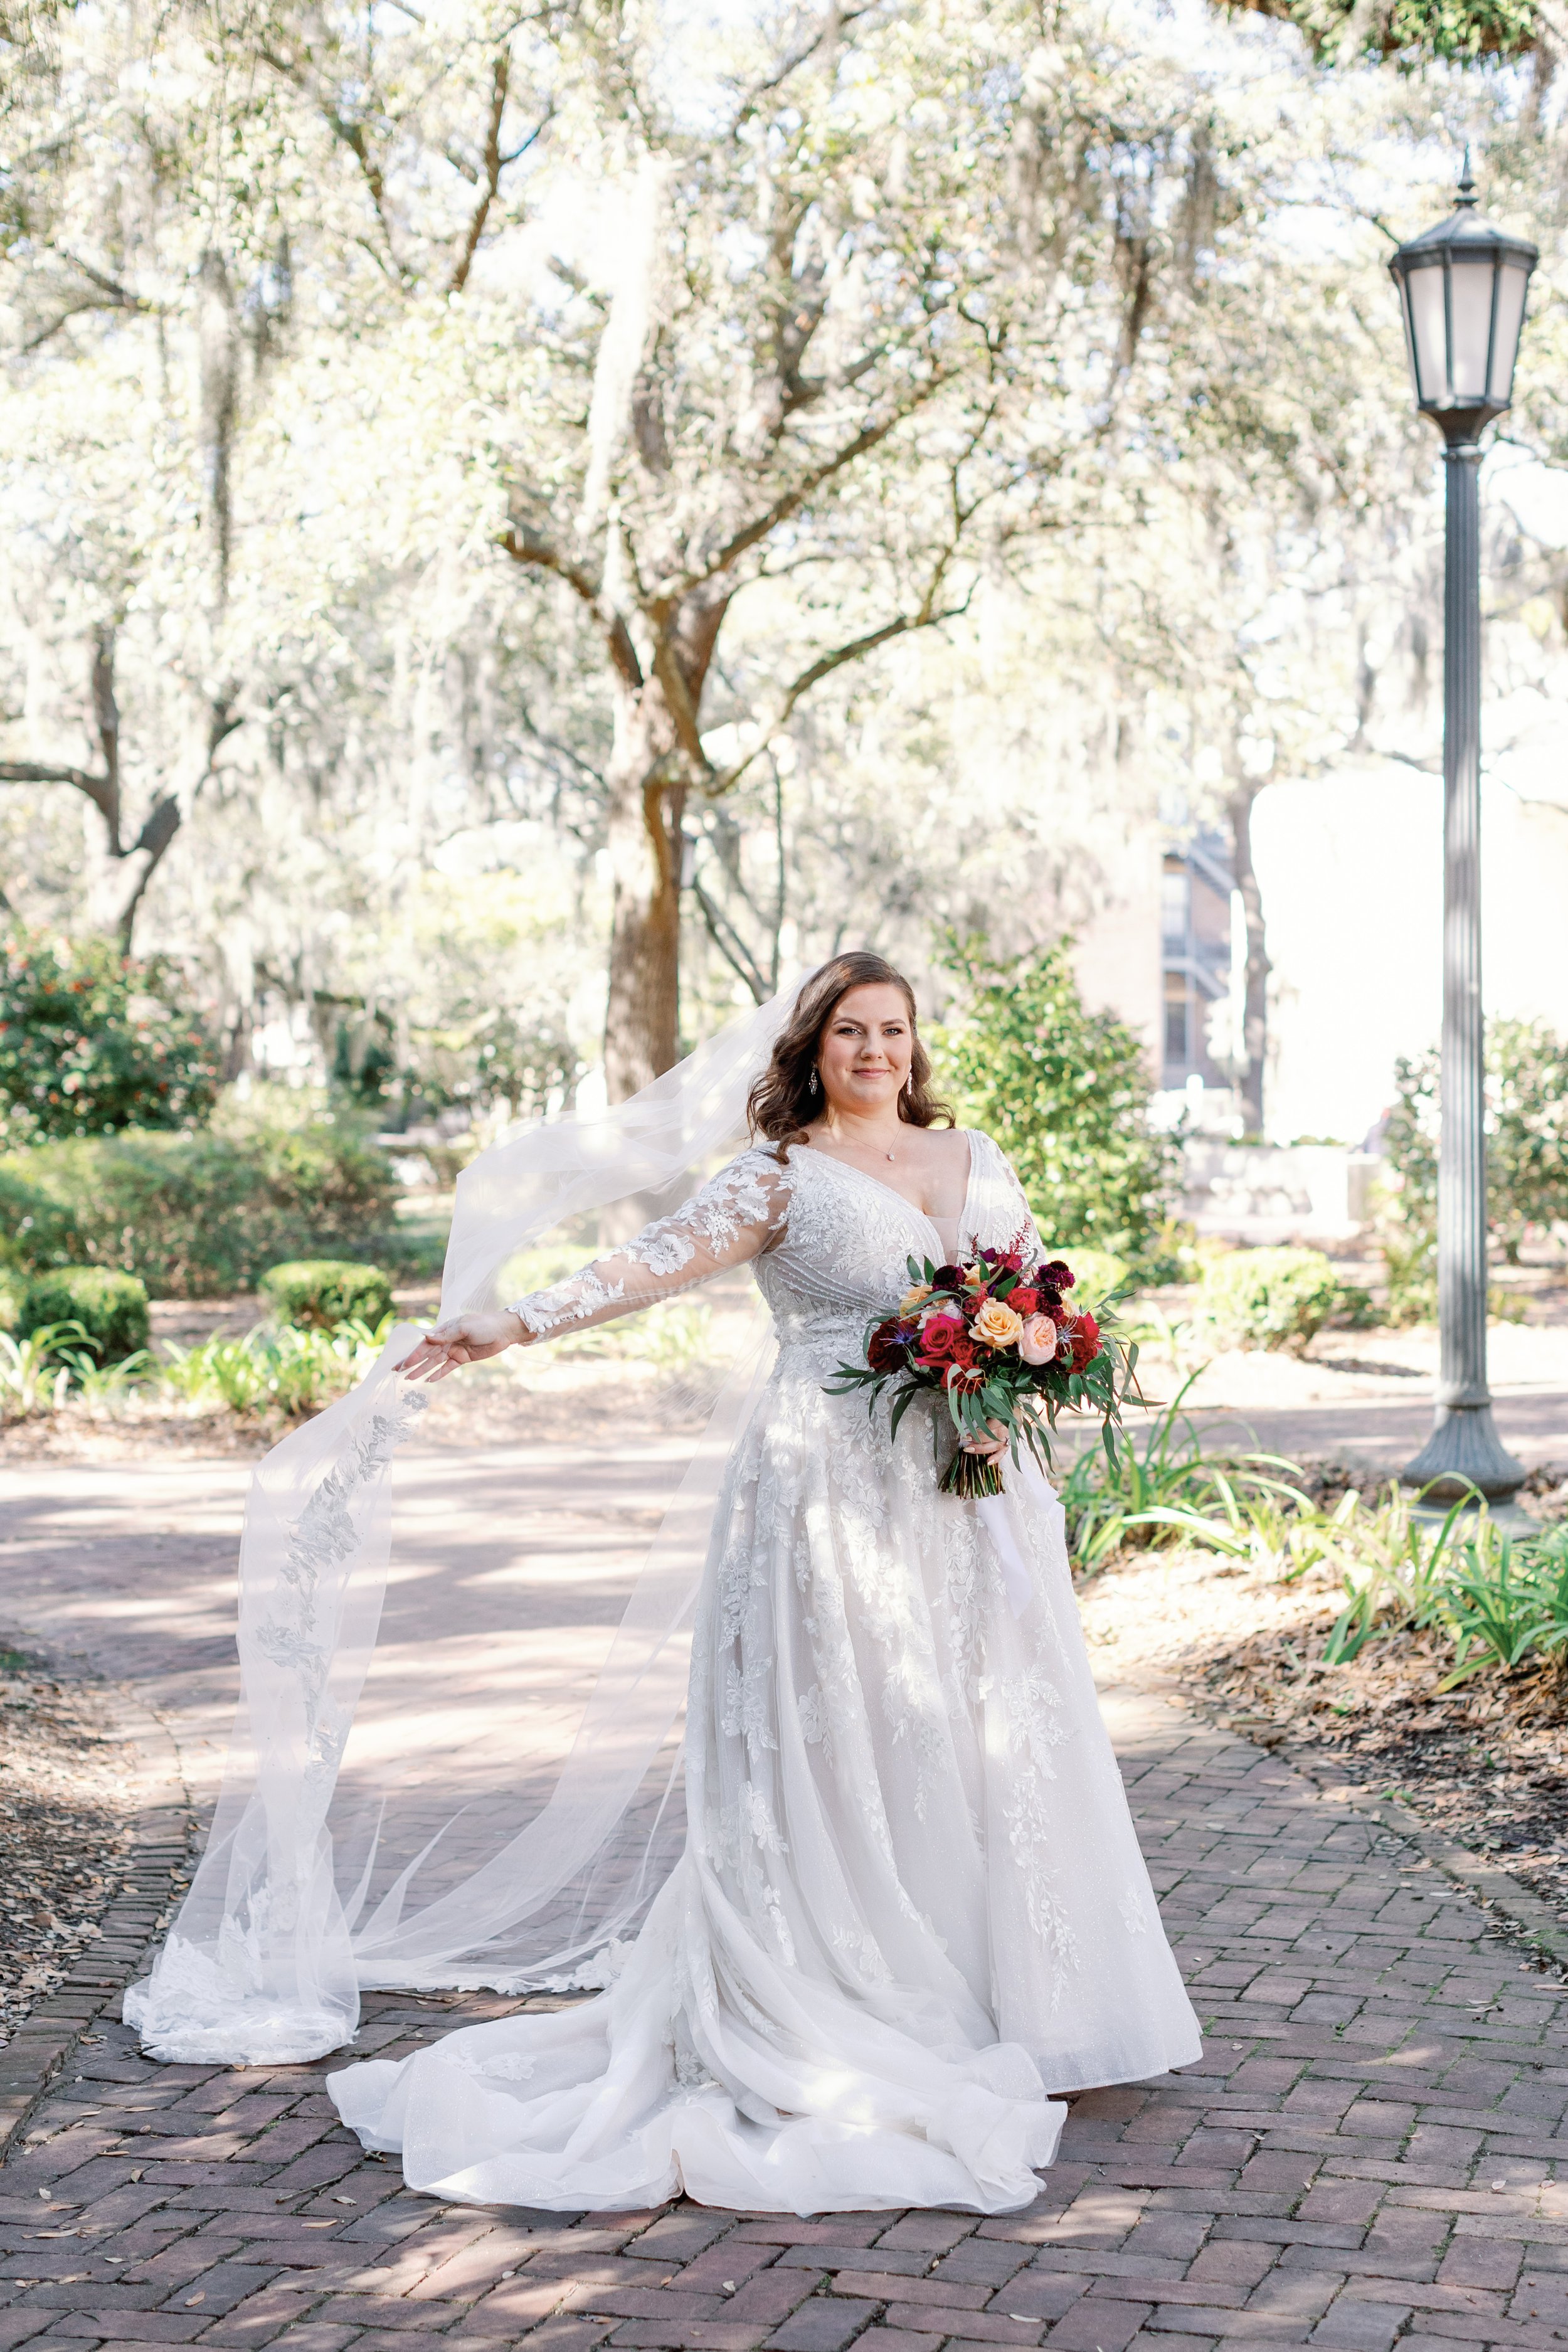 Savannah-bride-in-elegant-beaded-long-sleeve-lace-wedding-dress-essex-by-sottero-and-midgley-purchased-from-savannah-bridal-shop-ivory-and-beau-4.jpg